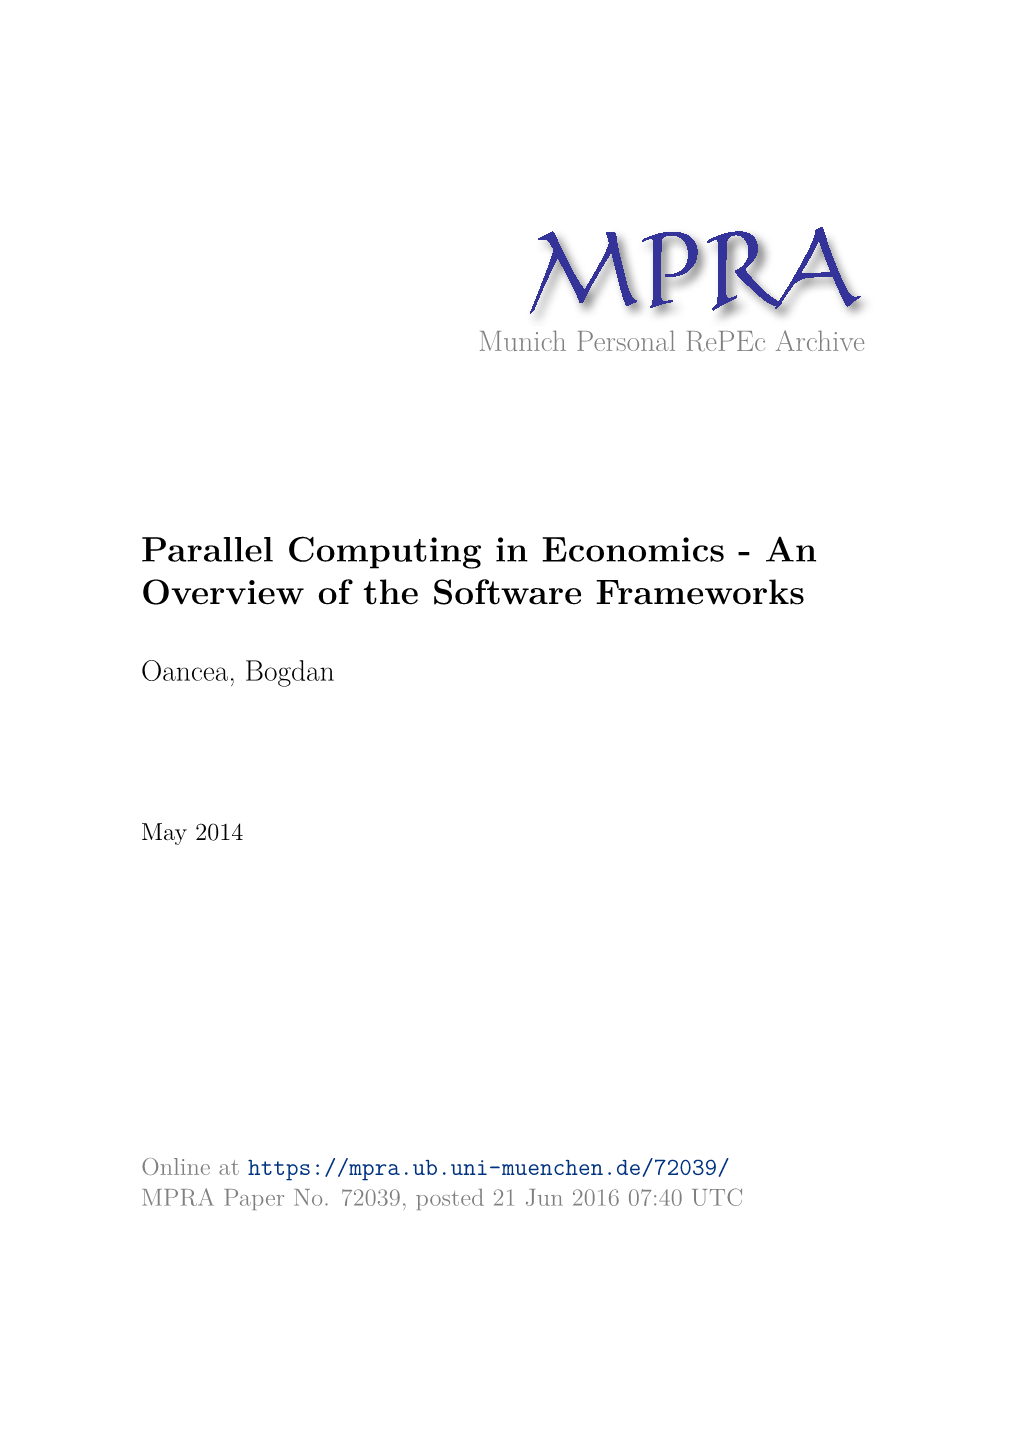 Parallel Computing in Economics - an Overview of the Software Frameworks